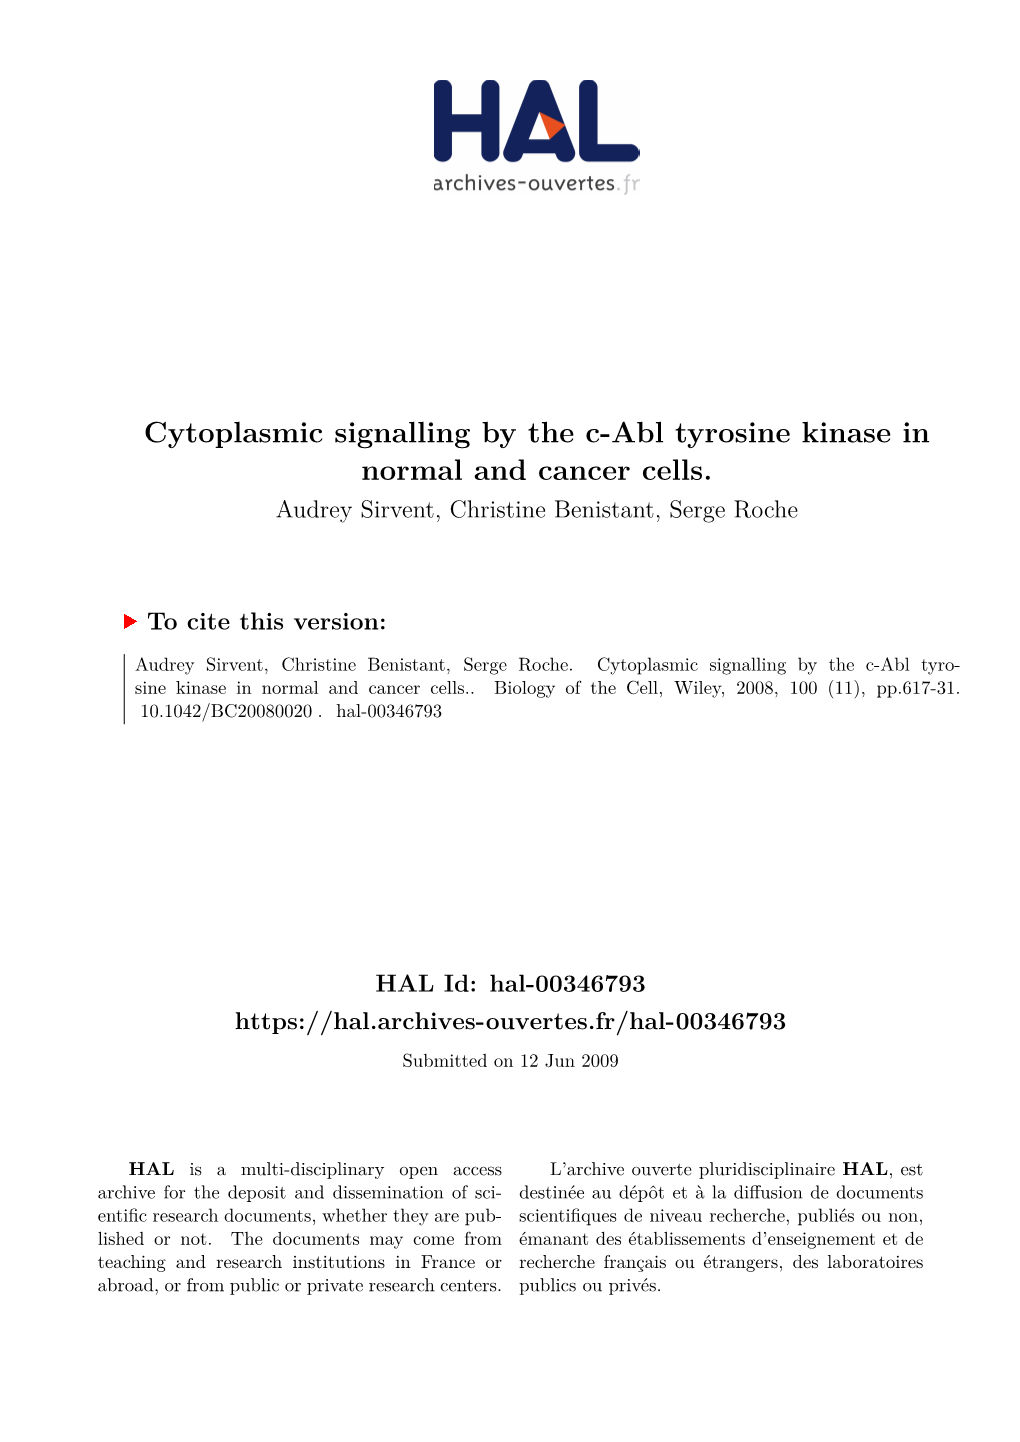 Cytoplasmic Signalling by the C-Abl Tyrosine Kinase in Normal and Cancer Cells